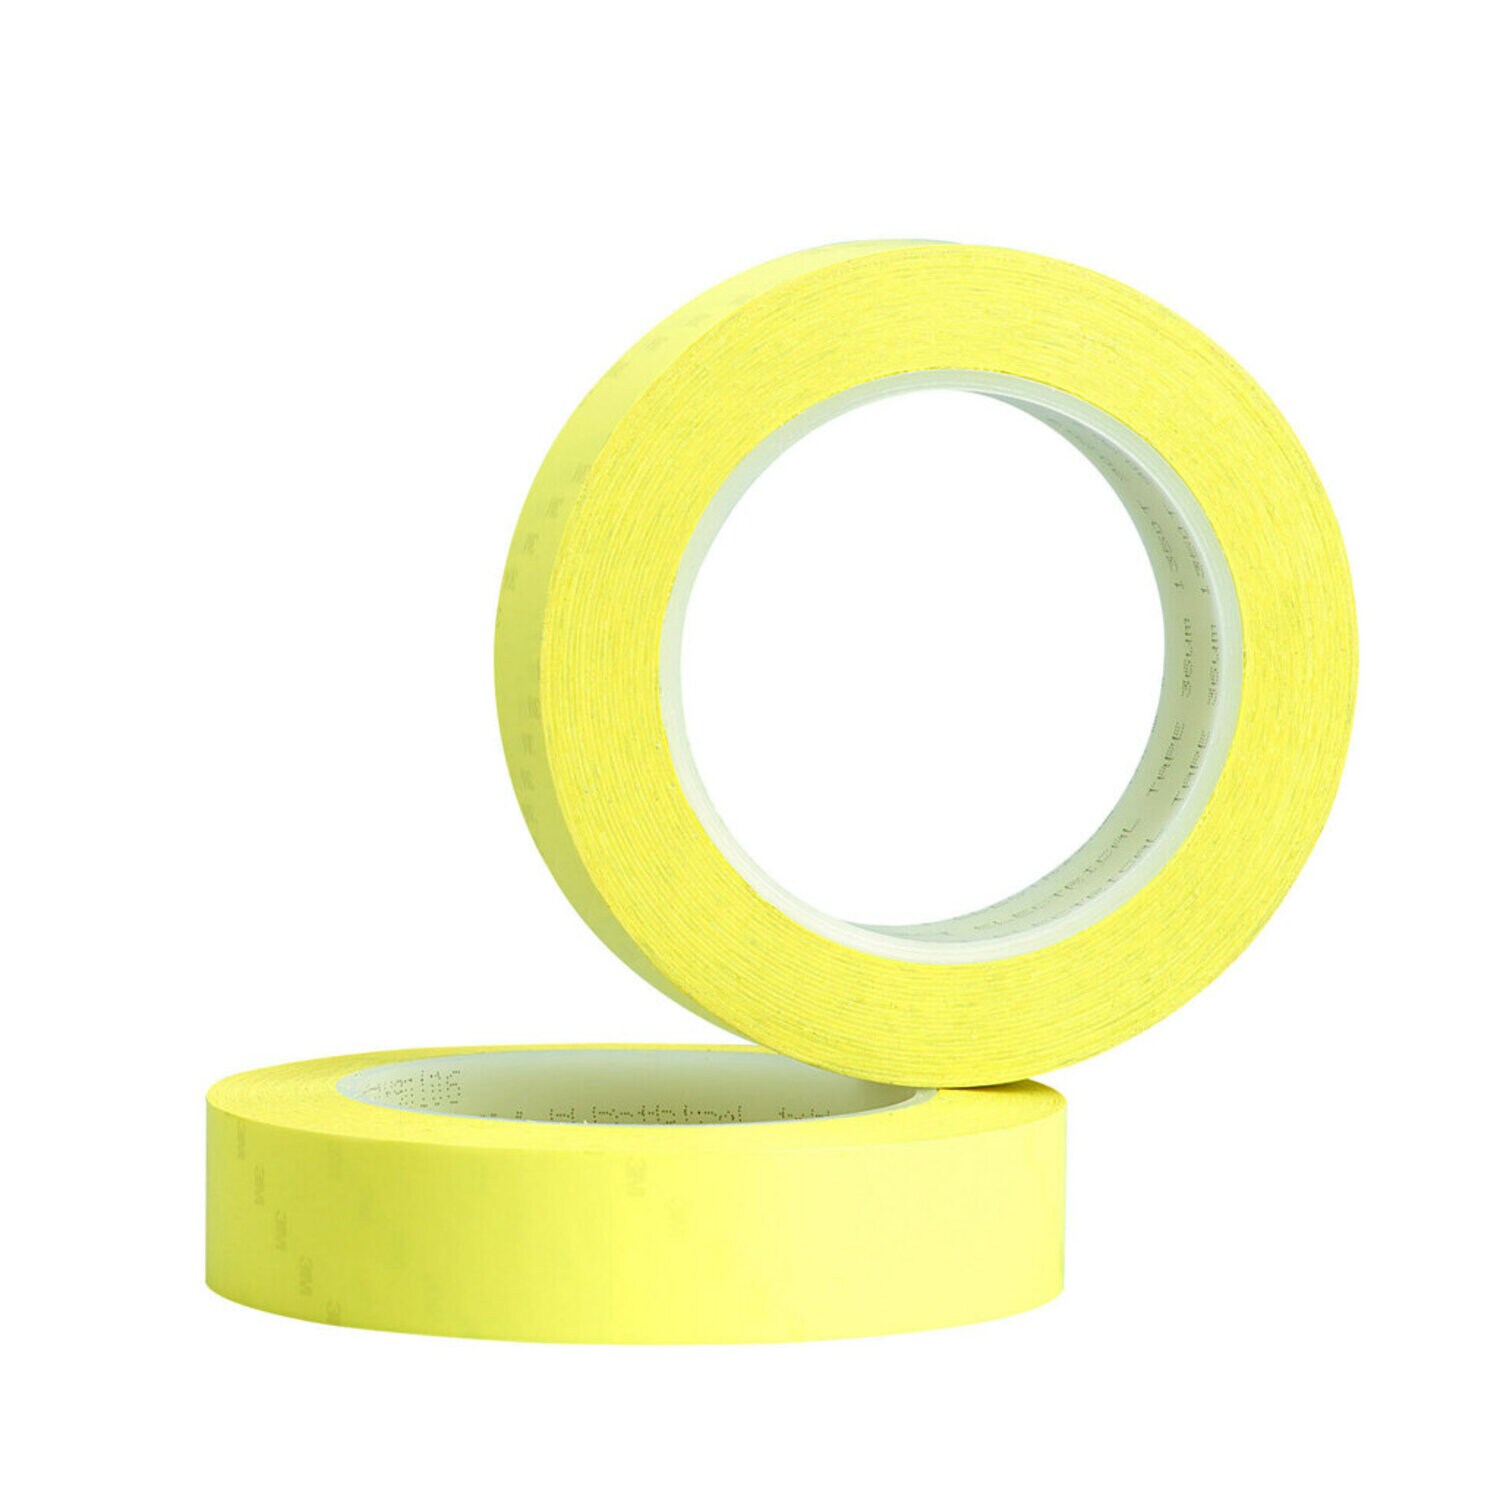 7010045305 - 3M Polyester Film Electrical Tape 57, 1 in x 72 yd, Yellow, 36
Rolls/Case